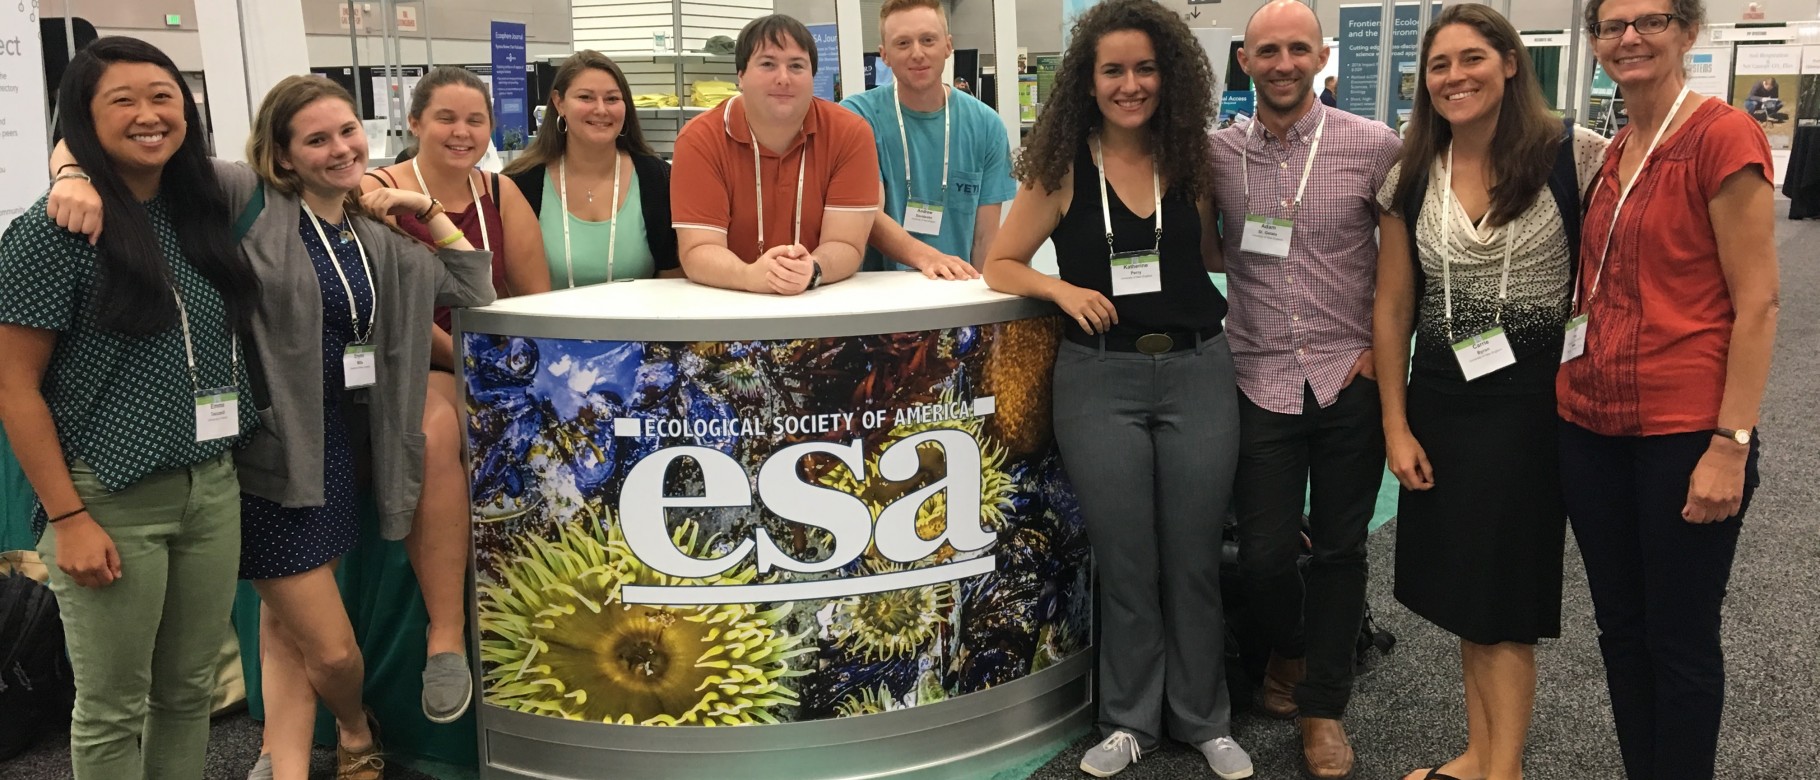 Students and faculty attend the Ecological Society of America's annual meeting